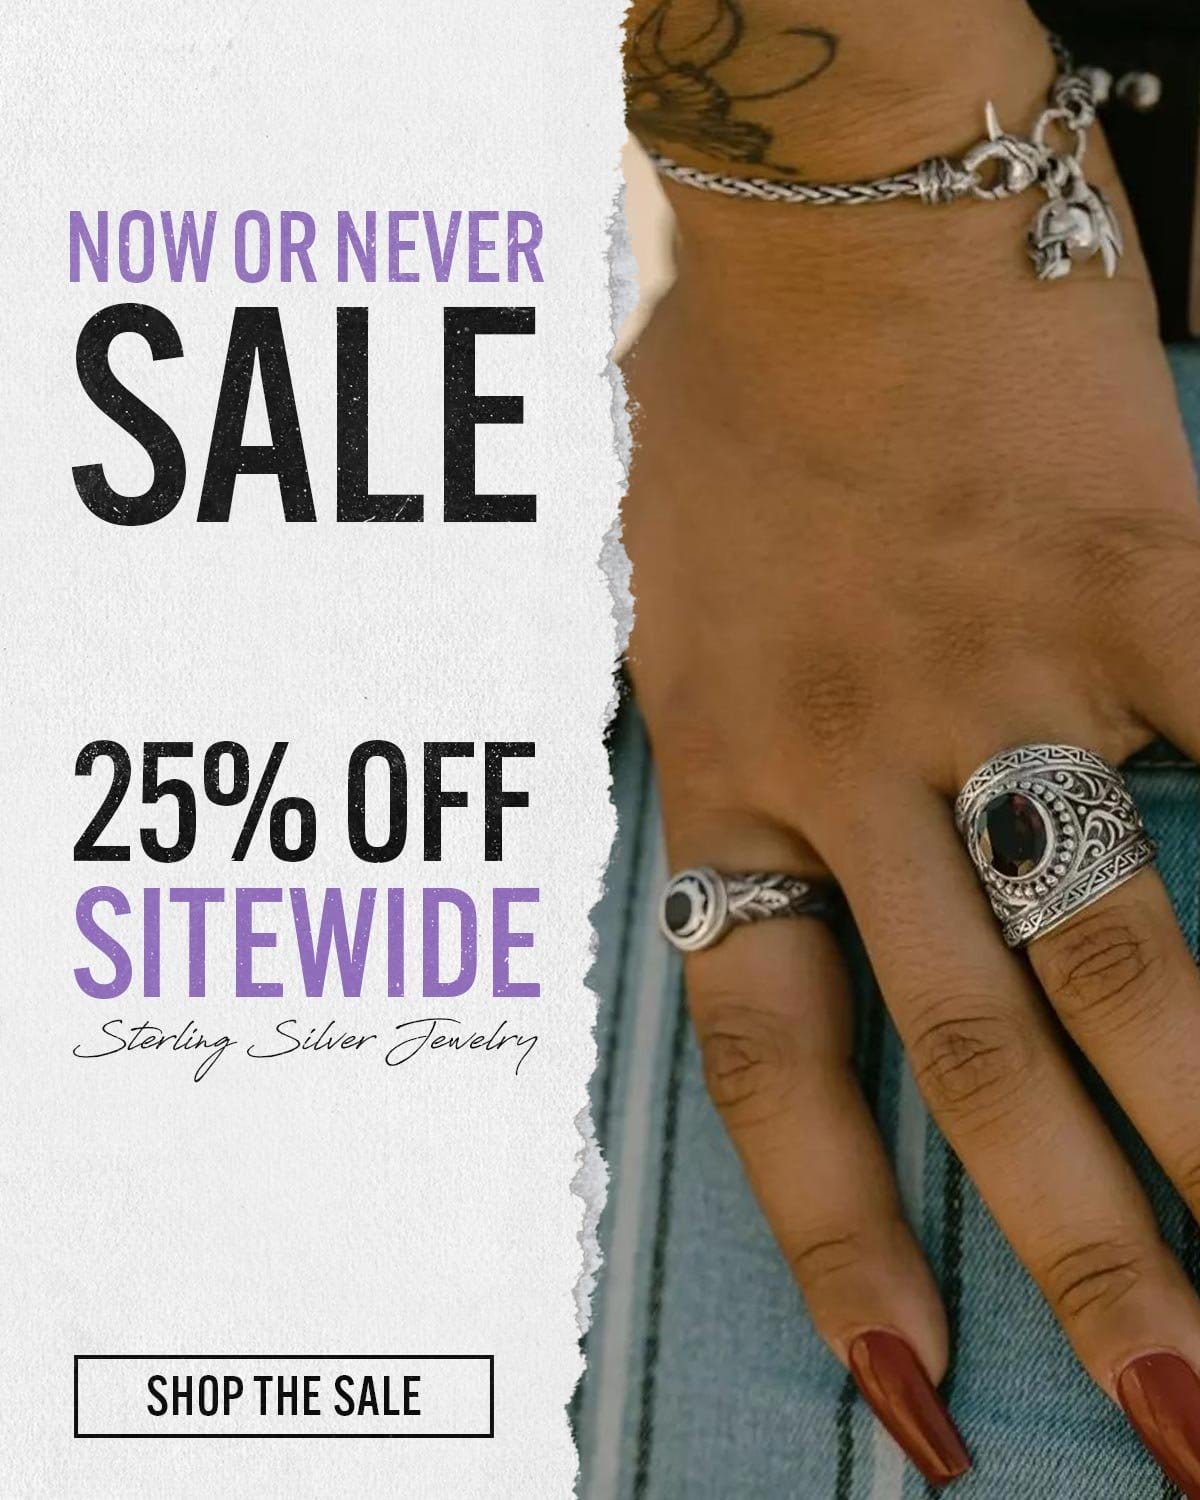 The Now or Never Sale